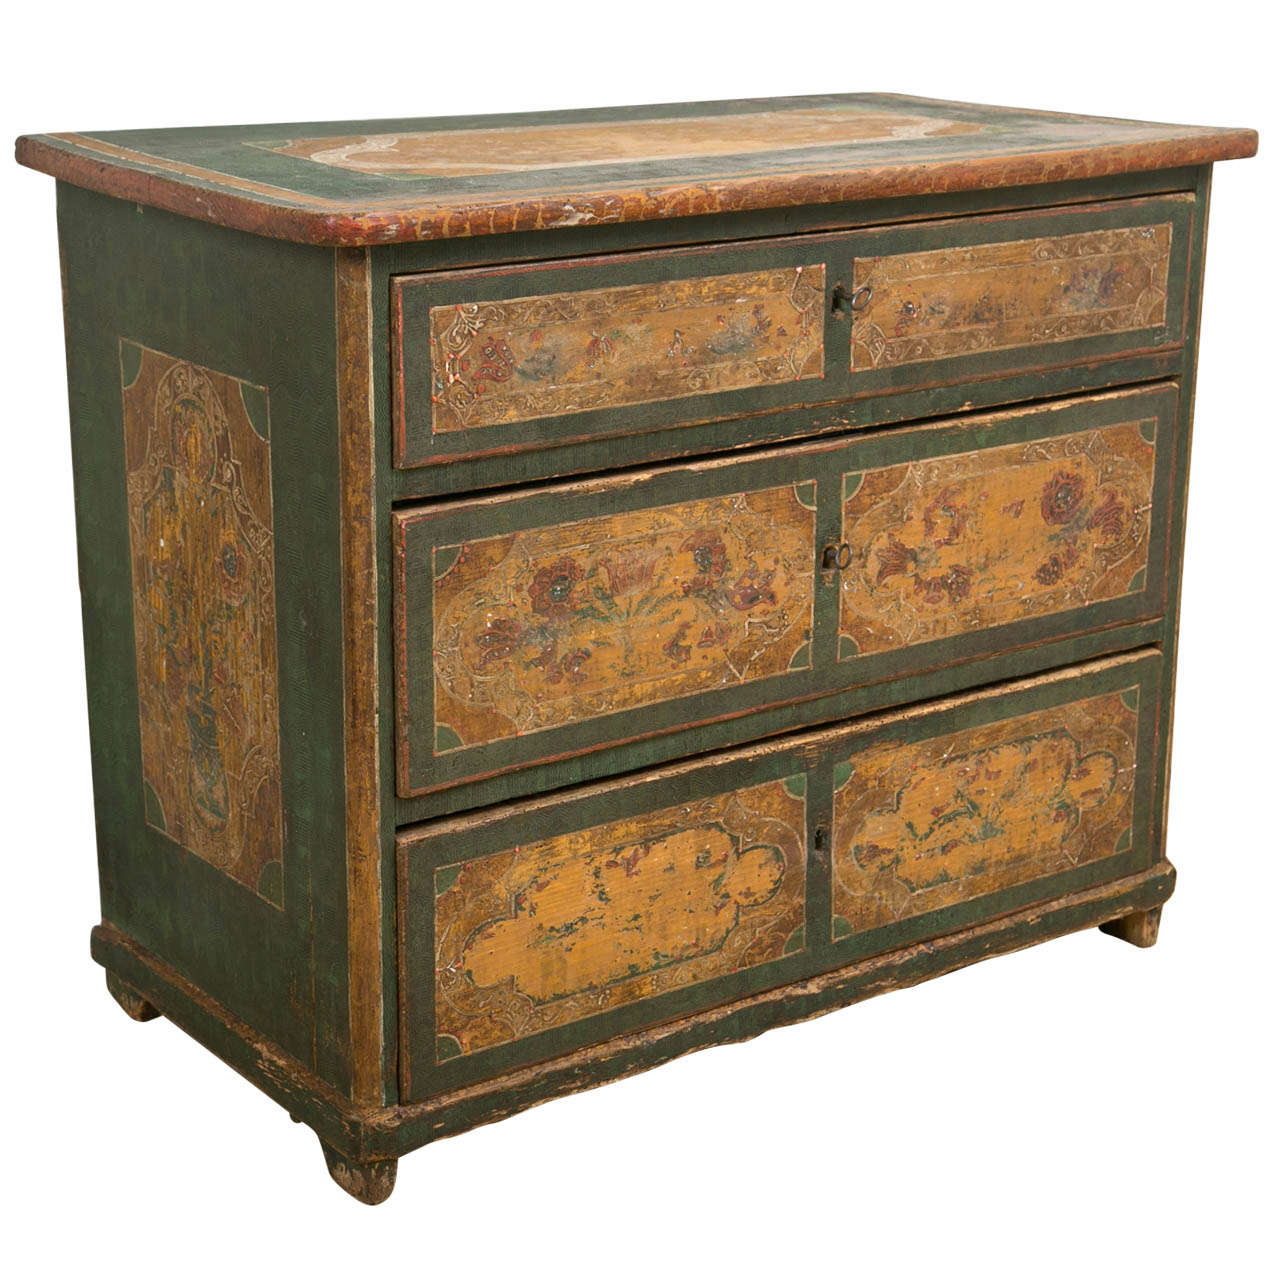 Continental Painted Wood Three Drawer Chest, Mid 19th Century For Sale